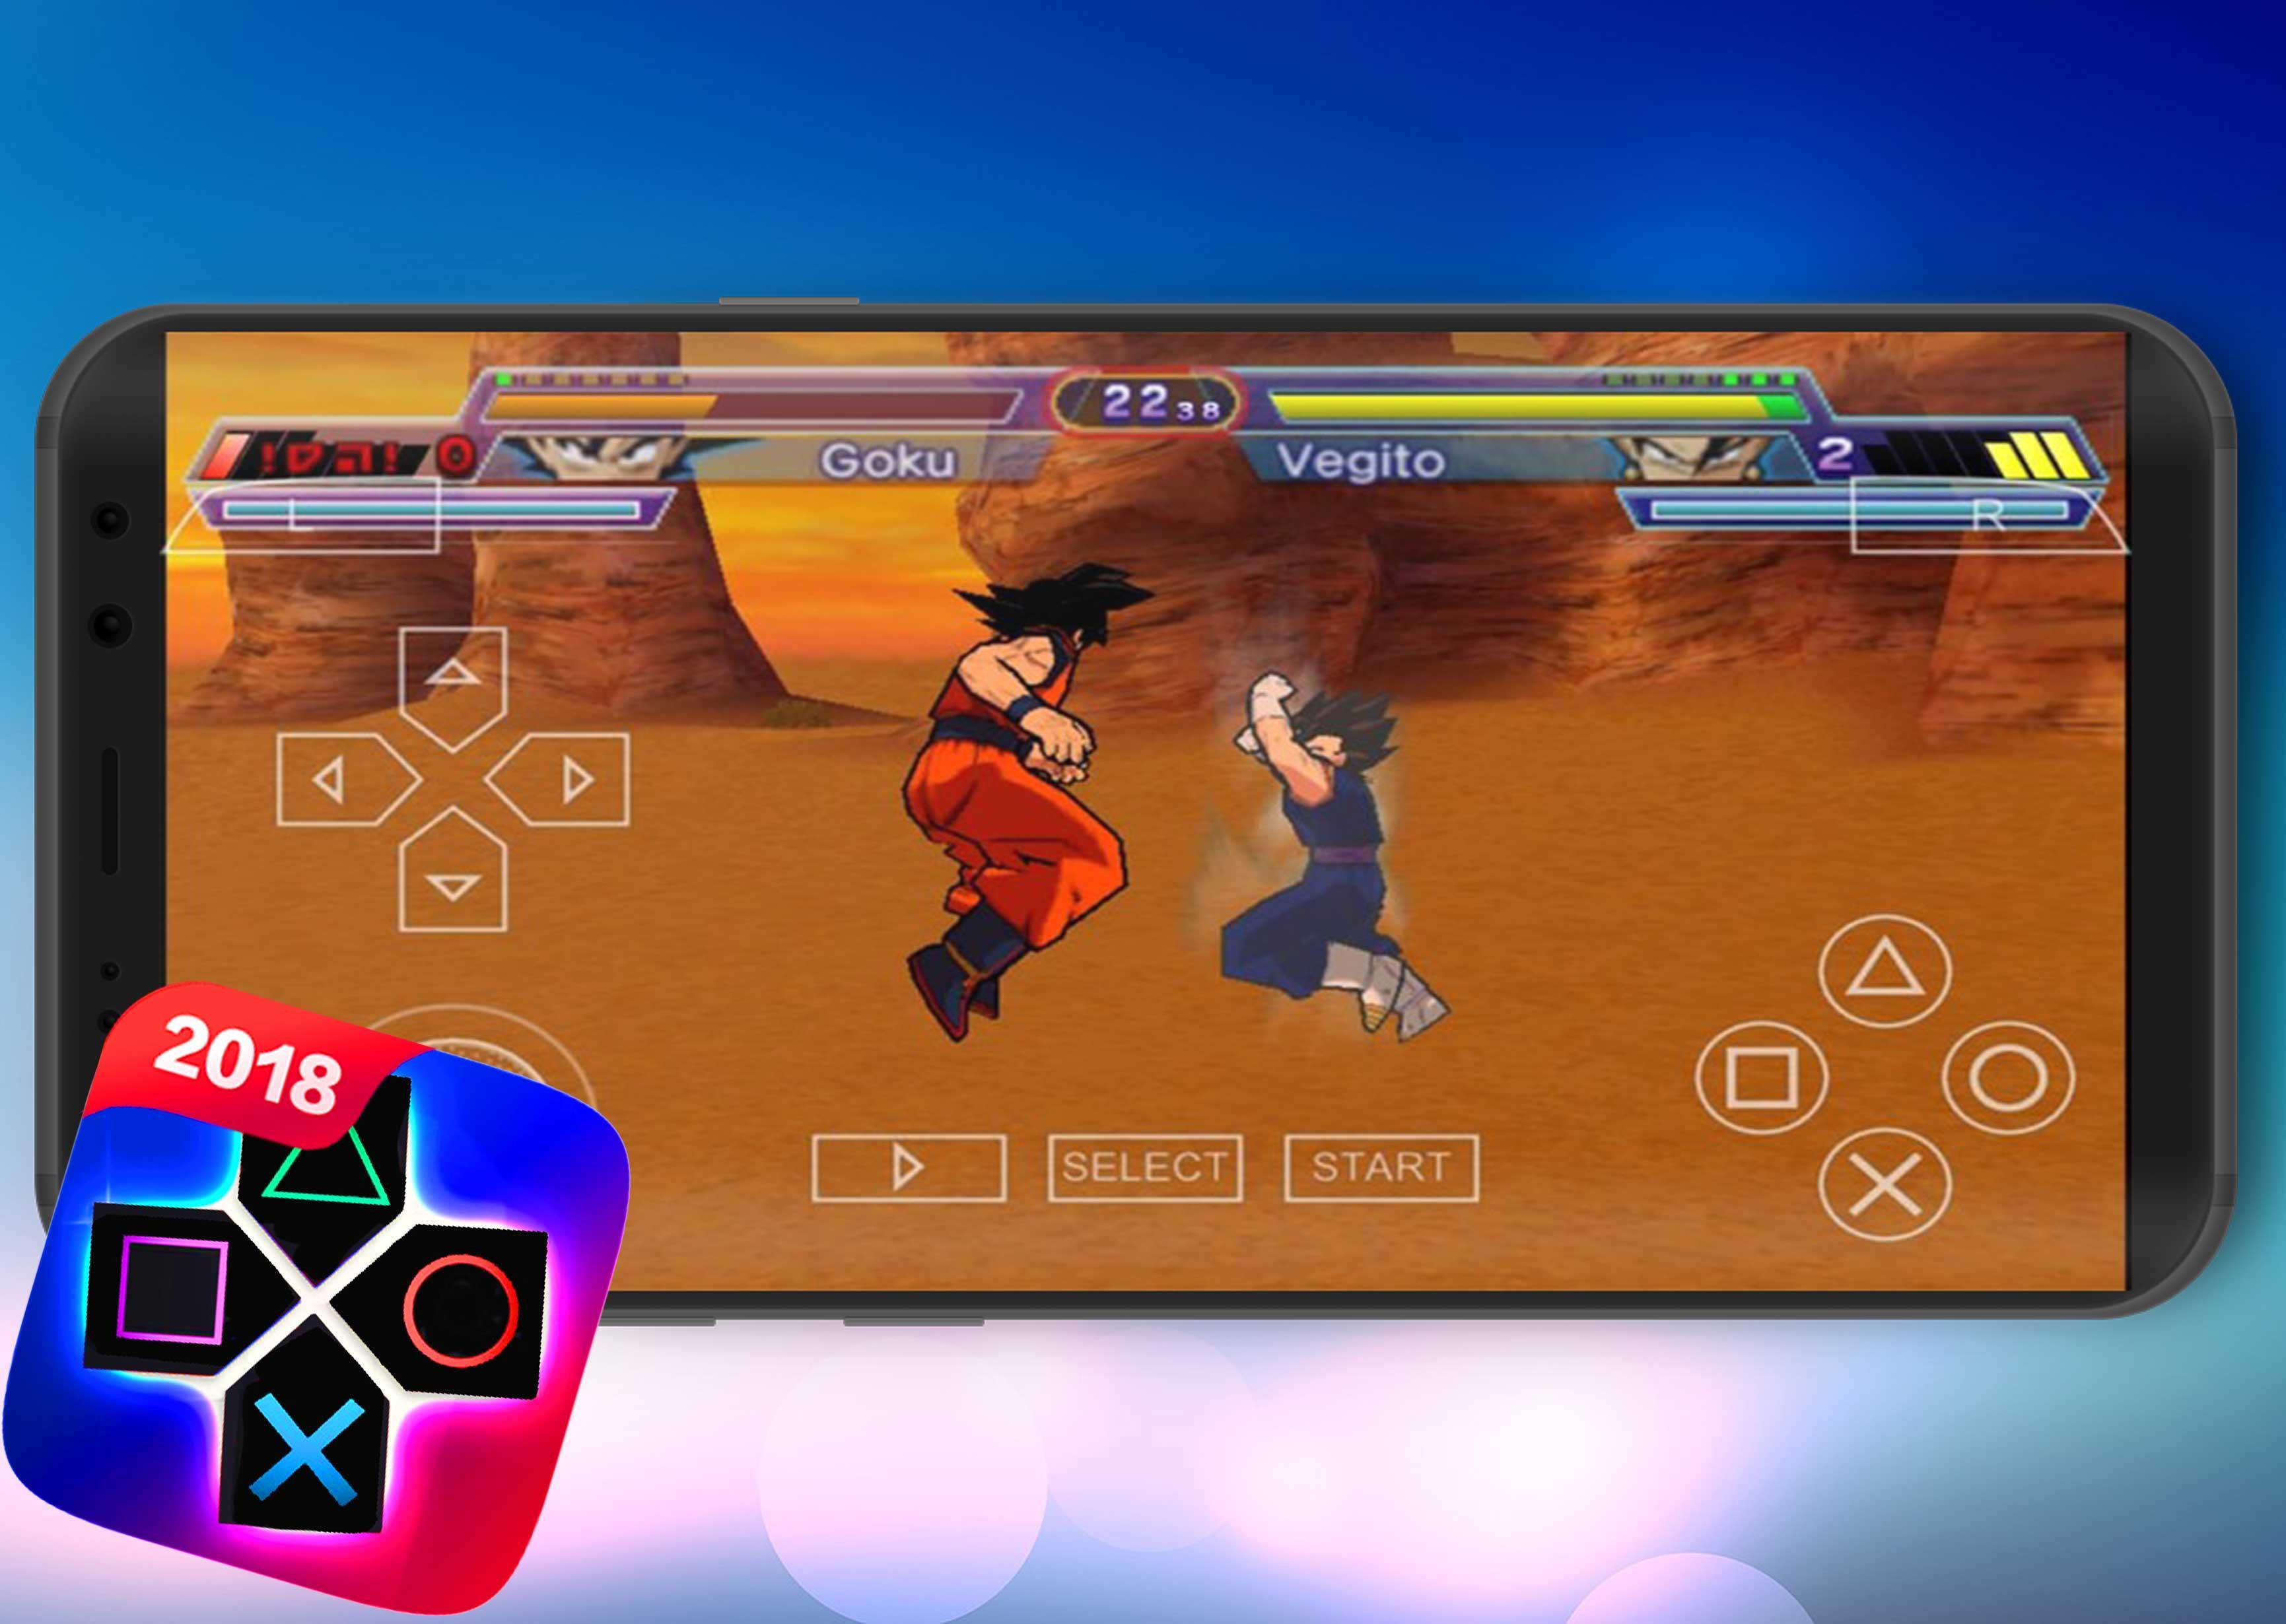 PPSSPP - New PSP Emulator Games for Android - APK Download